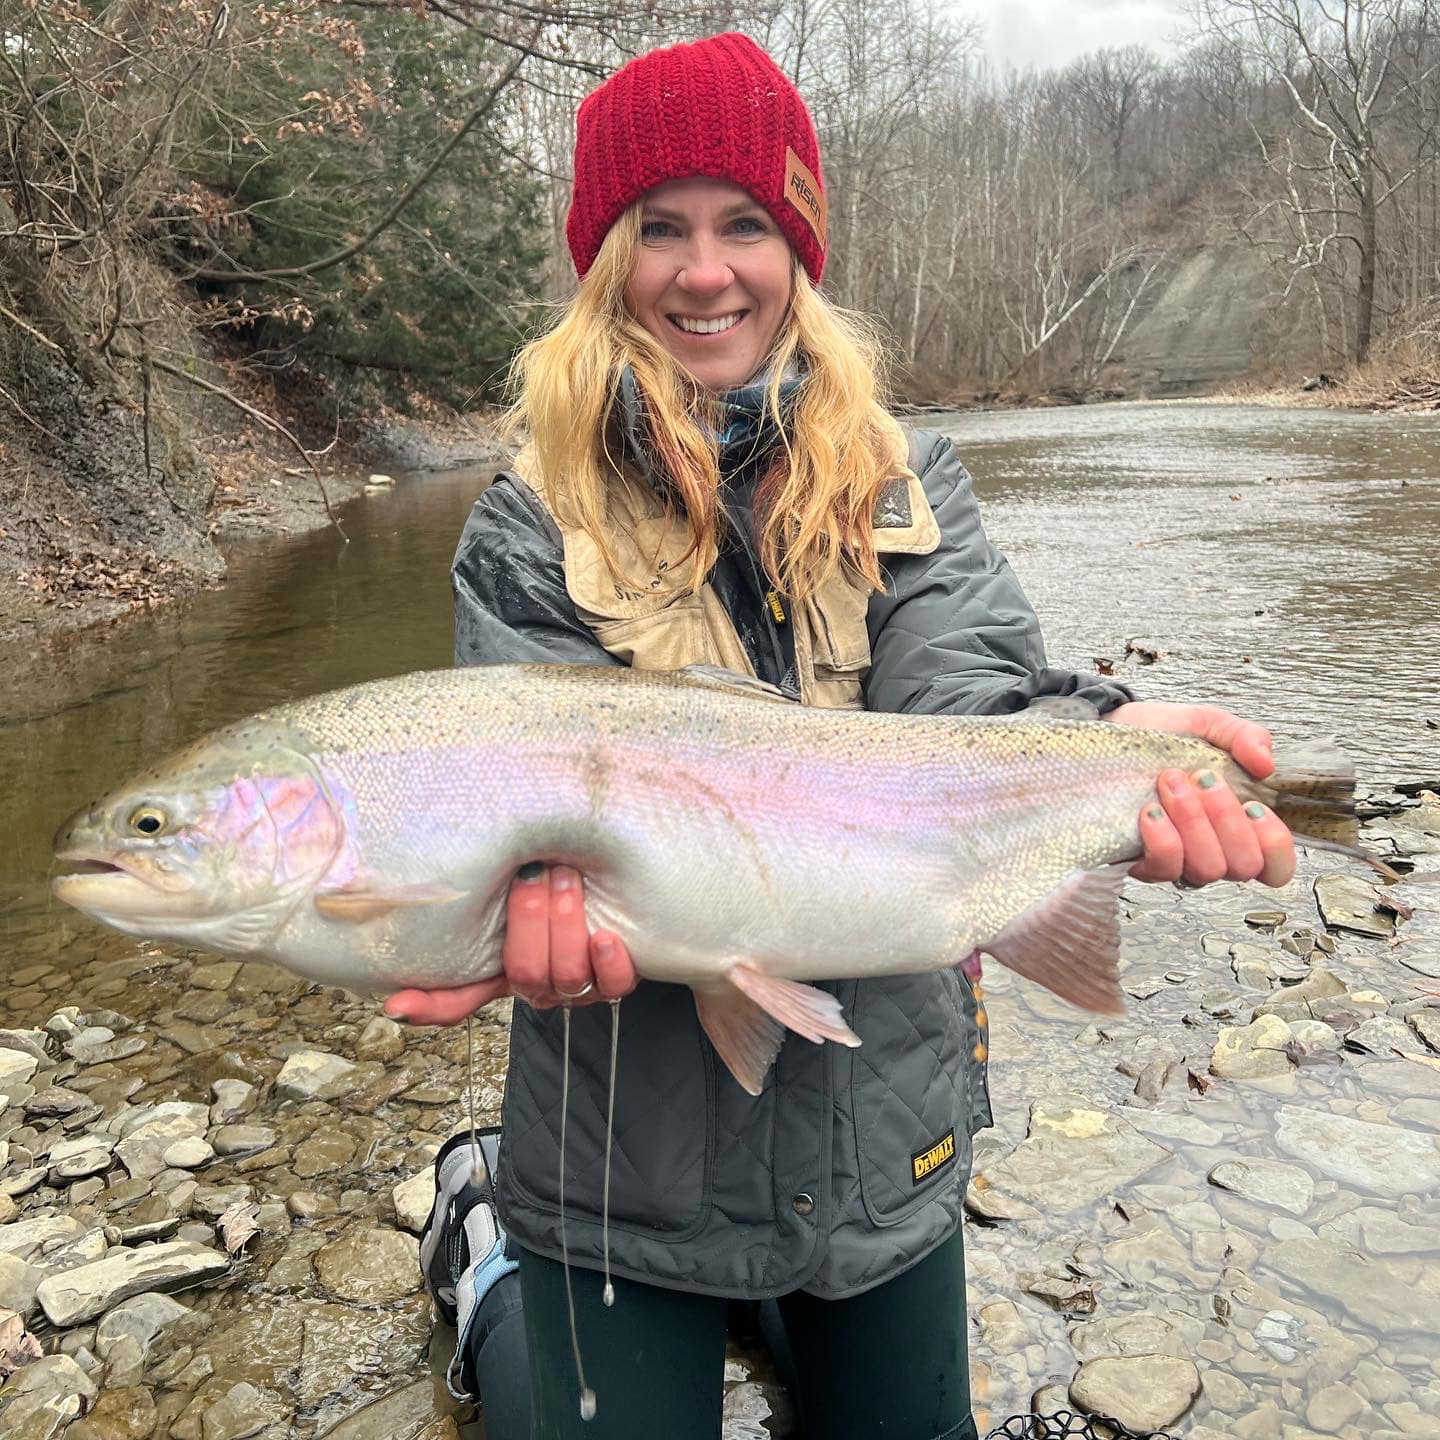 Tressa McCune with a nice trout.